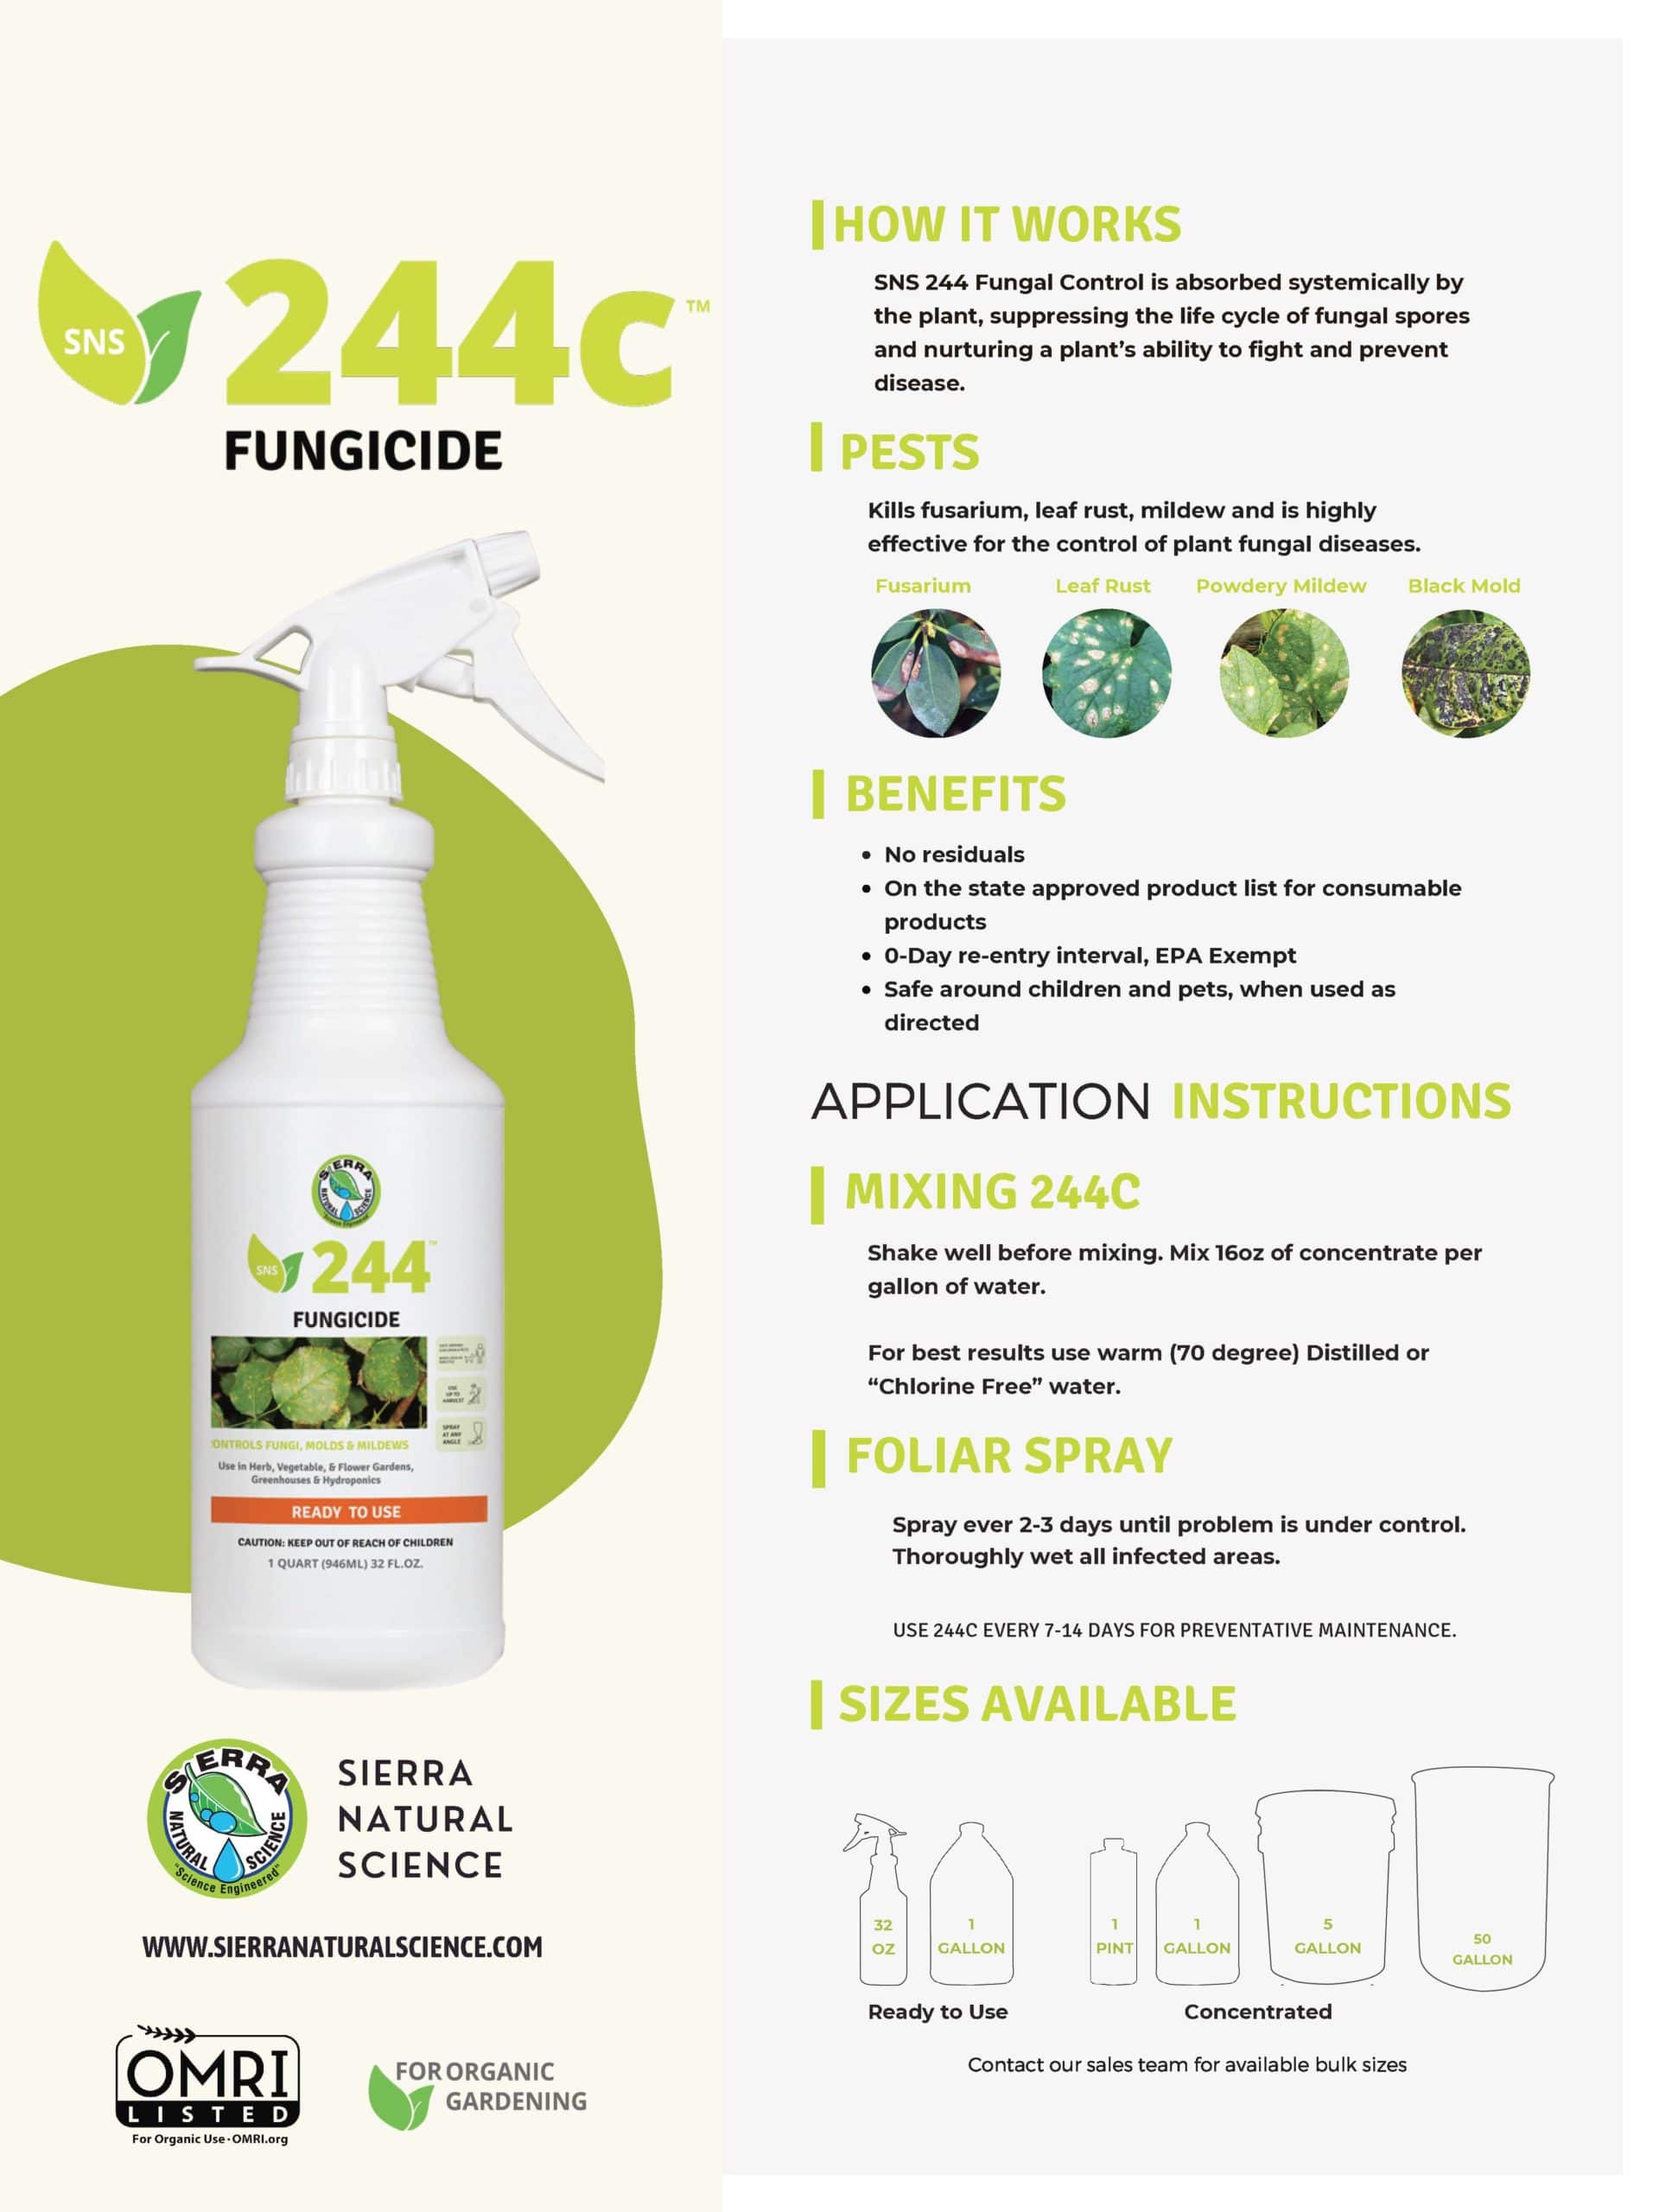 Informative Brochure for SNS 244C Fungicide Concentrate